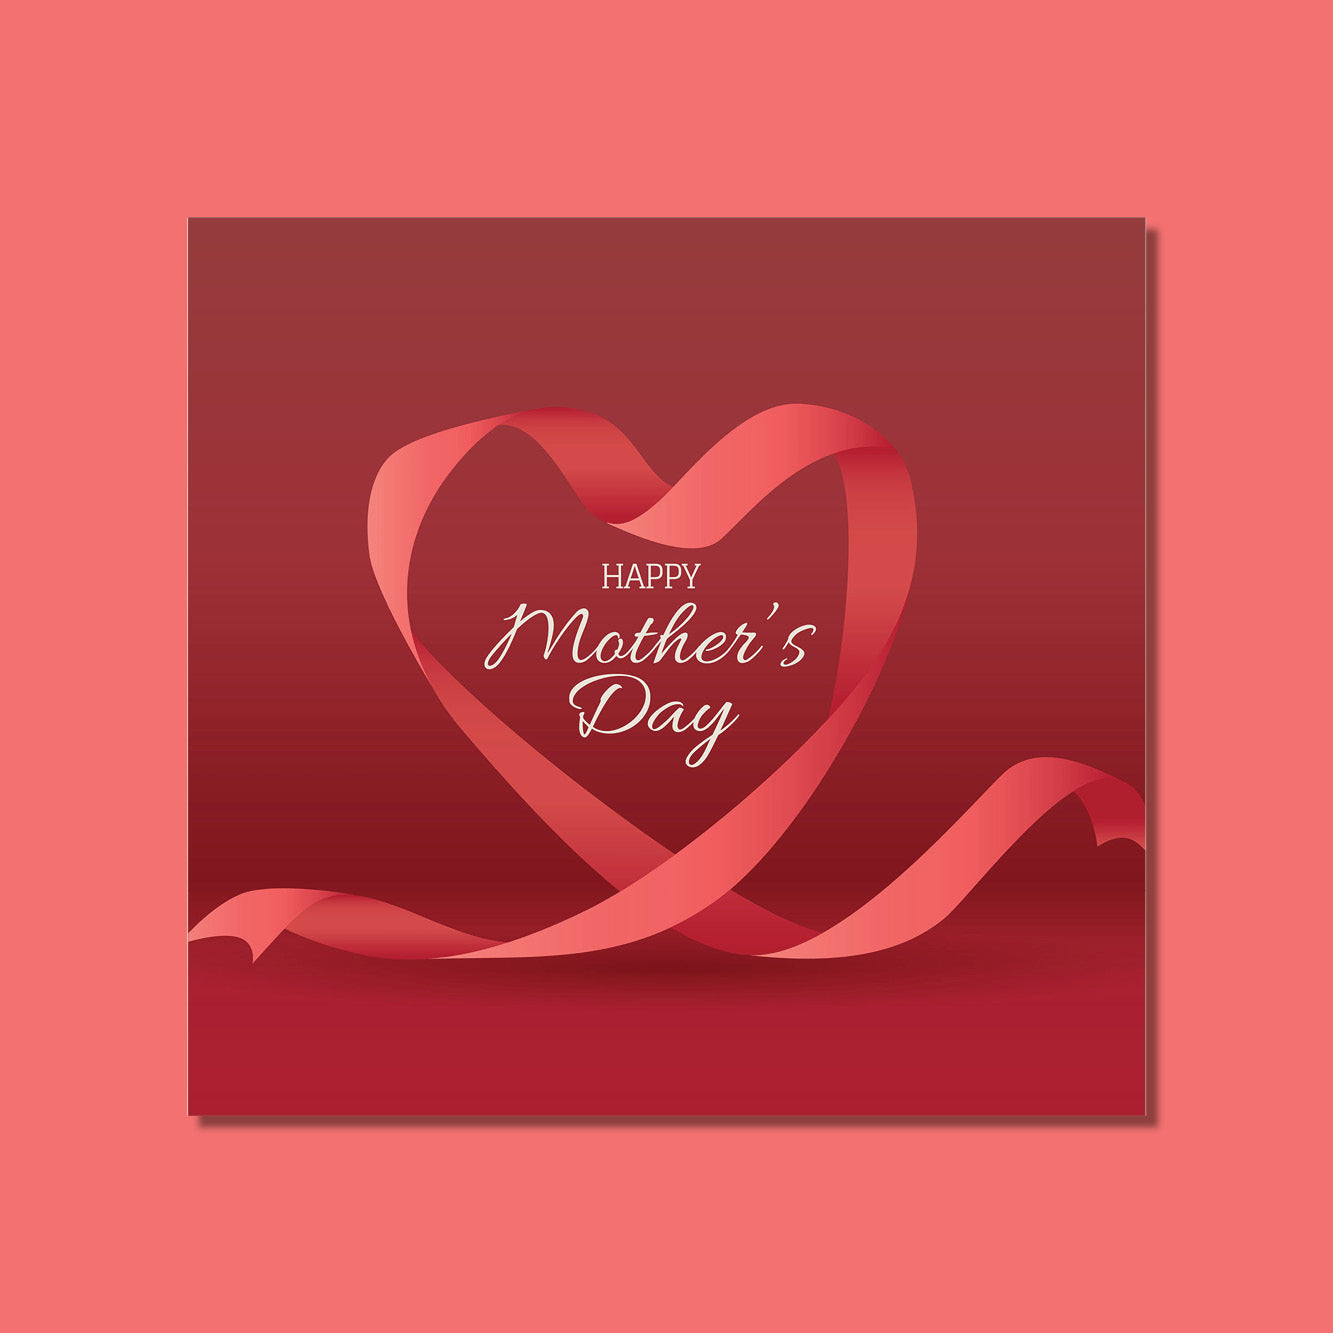 Mother's Day - Red Ribbon Heart